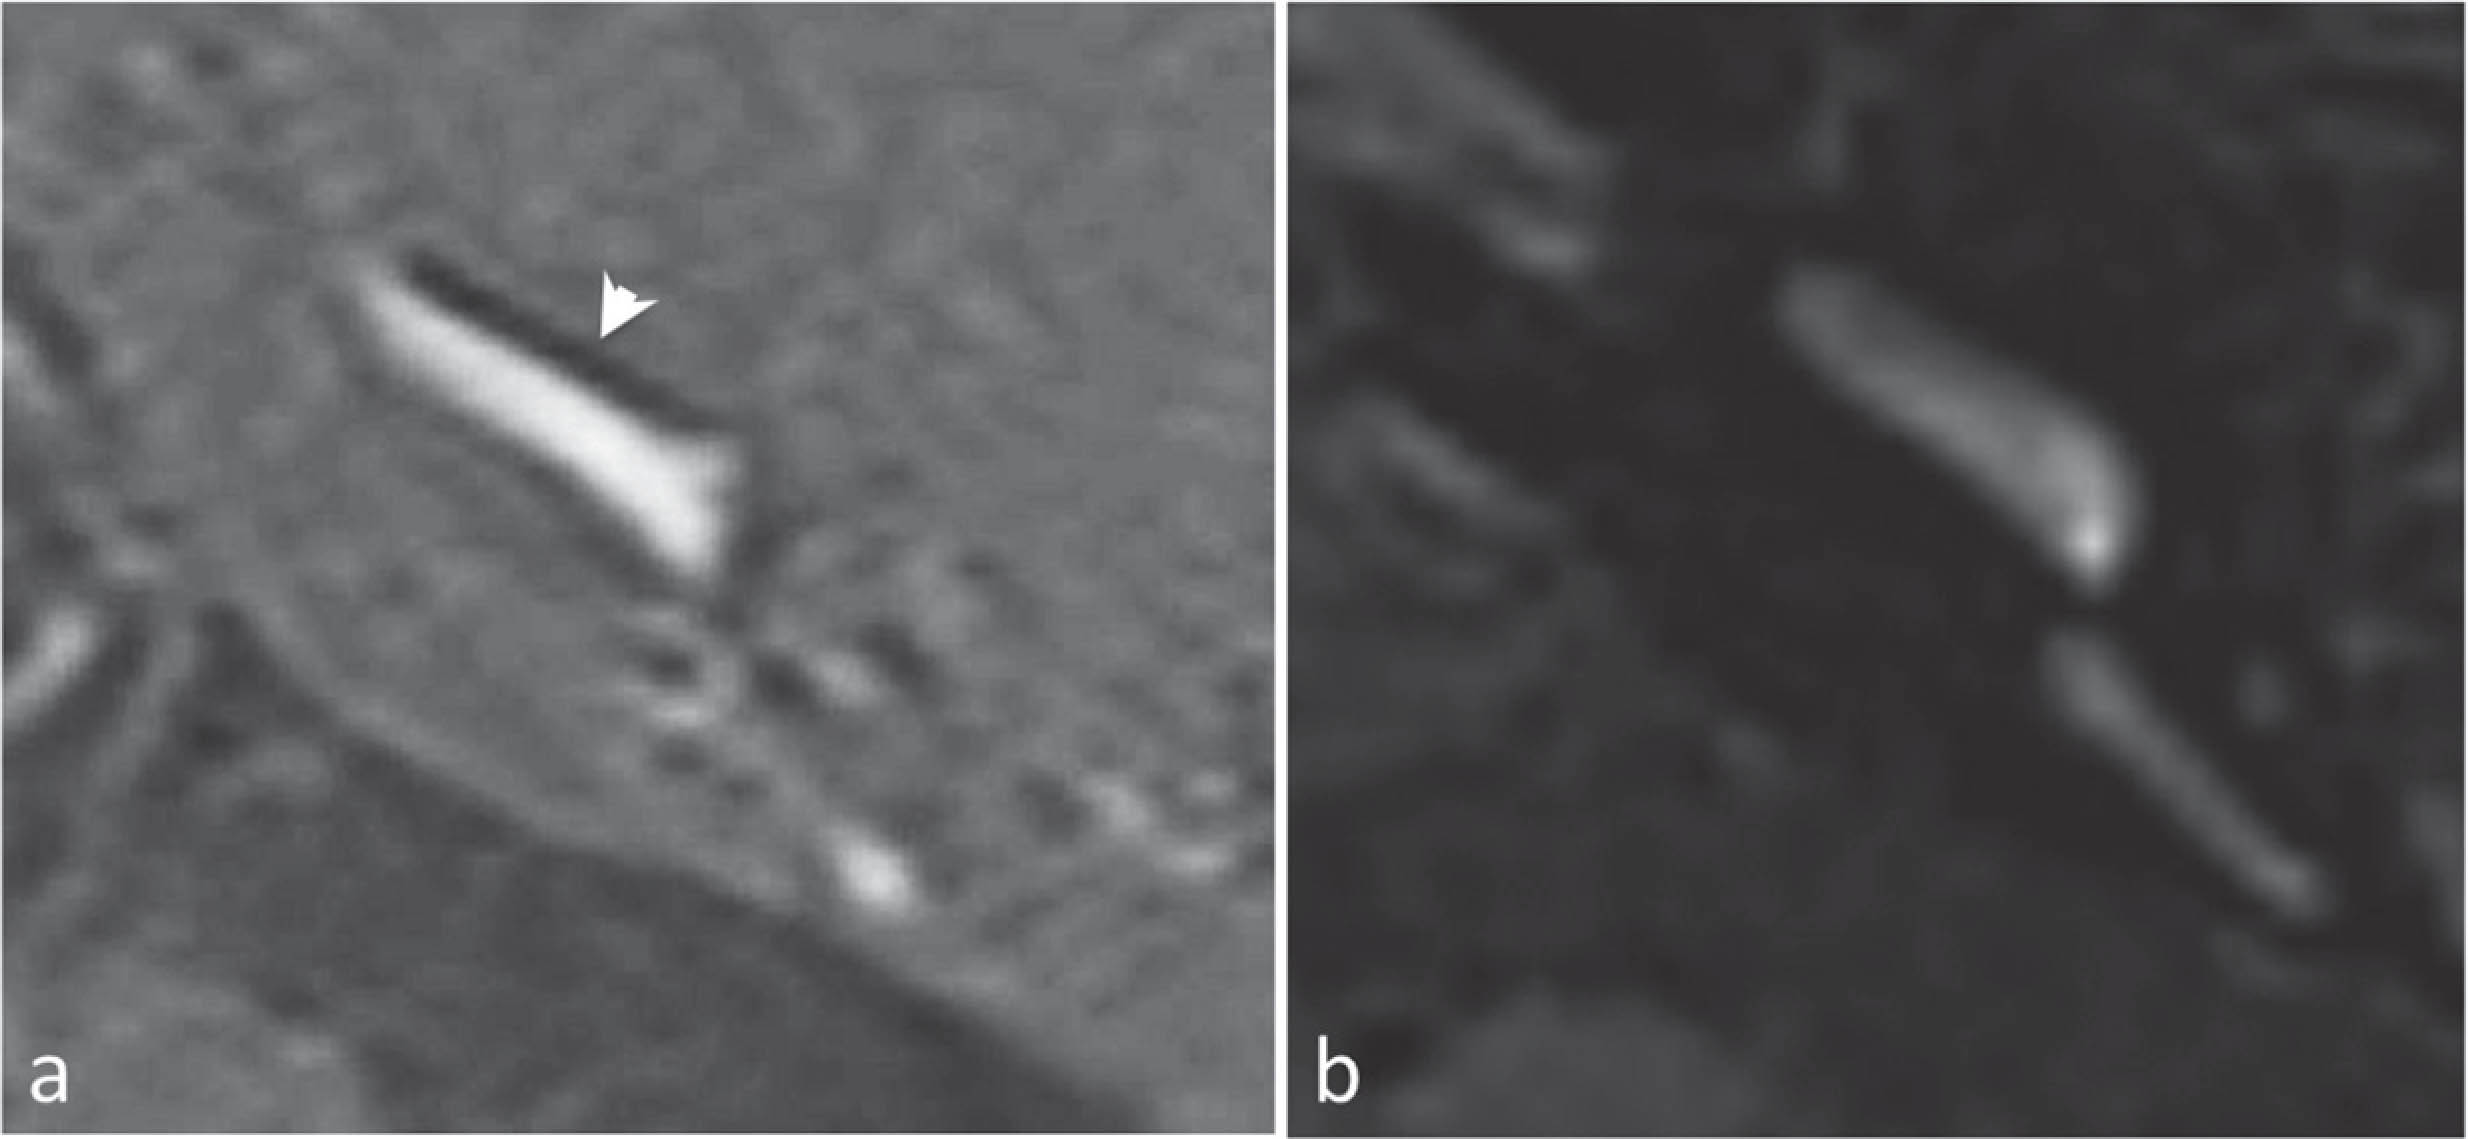 3D-IR sequence (a) and 3D-FALIR (b). Mild cochlear EH is clearly depicted on the 3D-IR (arrowhead) in a, as a dark smooth line corresponding to the mildly dilated cochlear duct. The contrast between the perilymph (high signal) and the surrounding bone (grey, intermediate signal) makes this diagnosis possible. On the contrary, when we analyze the 3D-FLAIR image in b, the surrounding bone -which is also low signal-, makes it almost impossible to distinguish the mild cochlear EH.